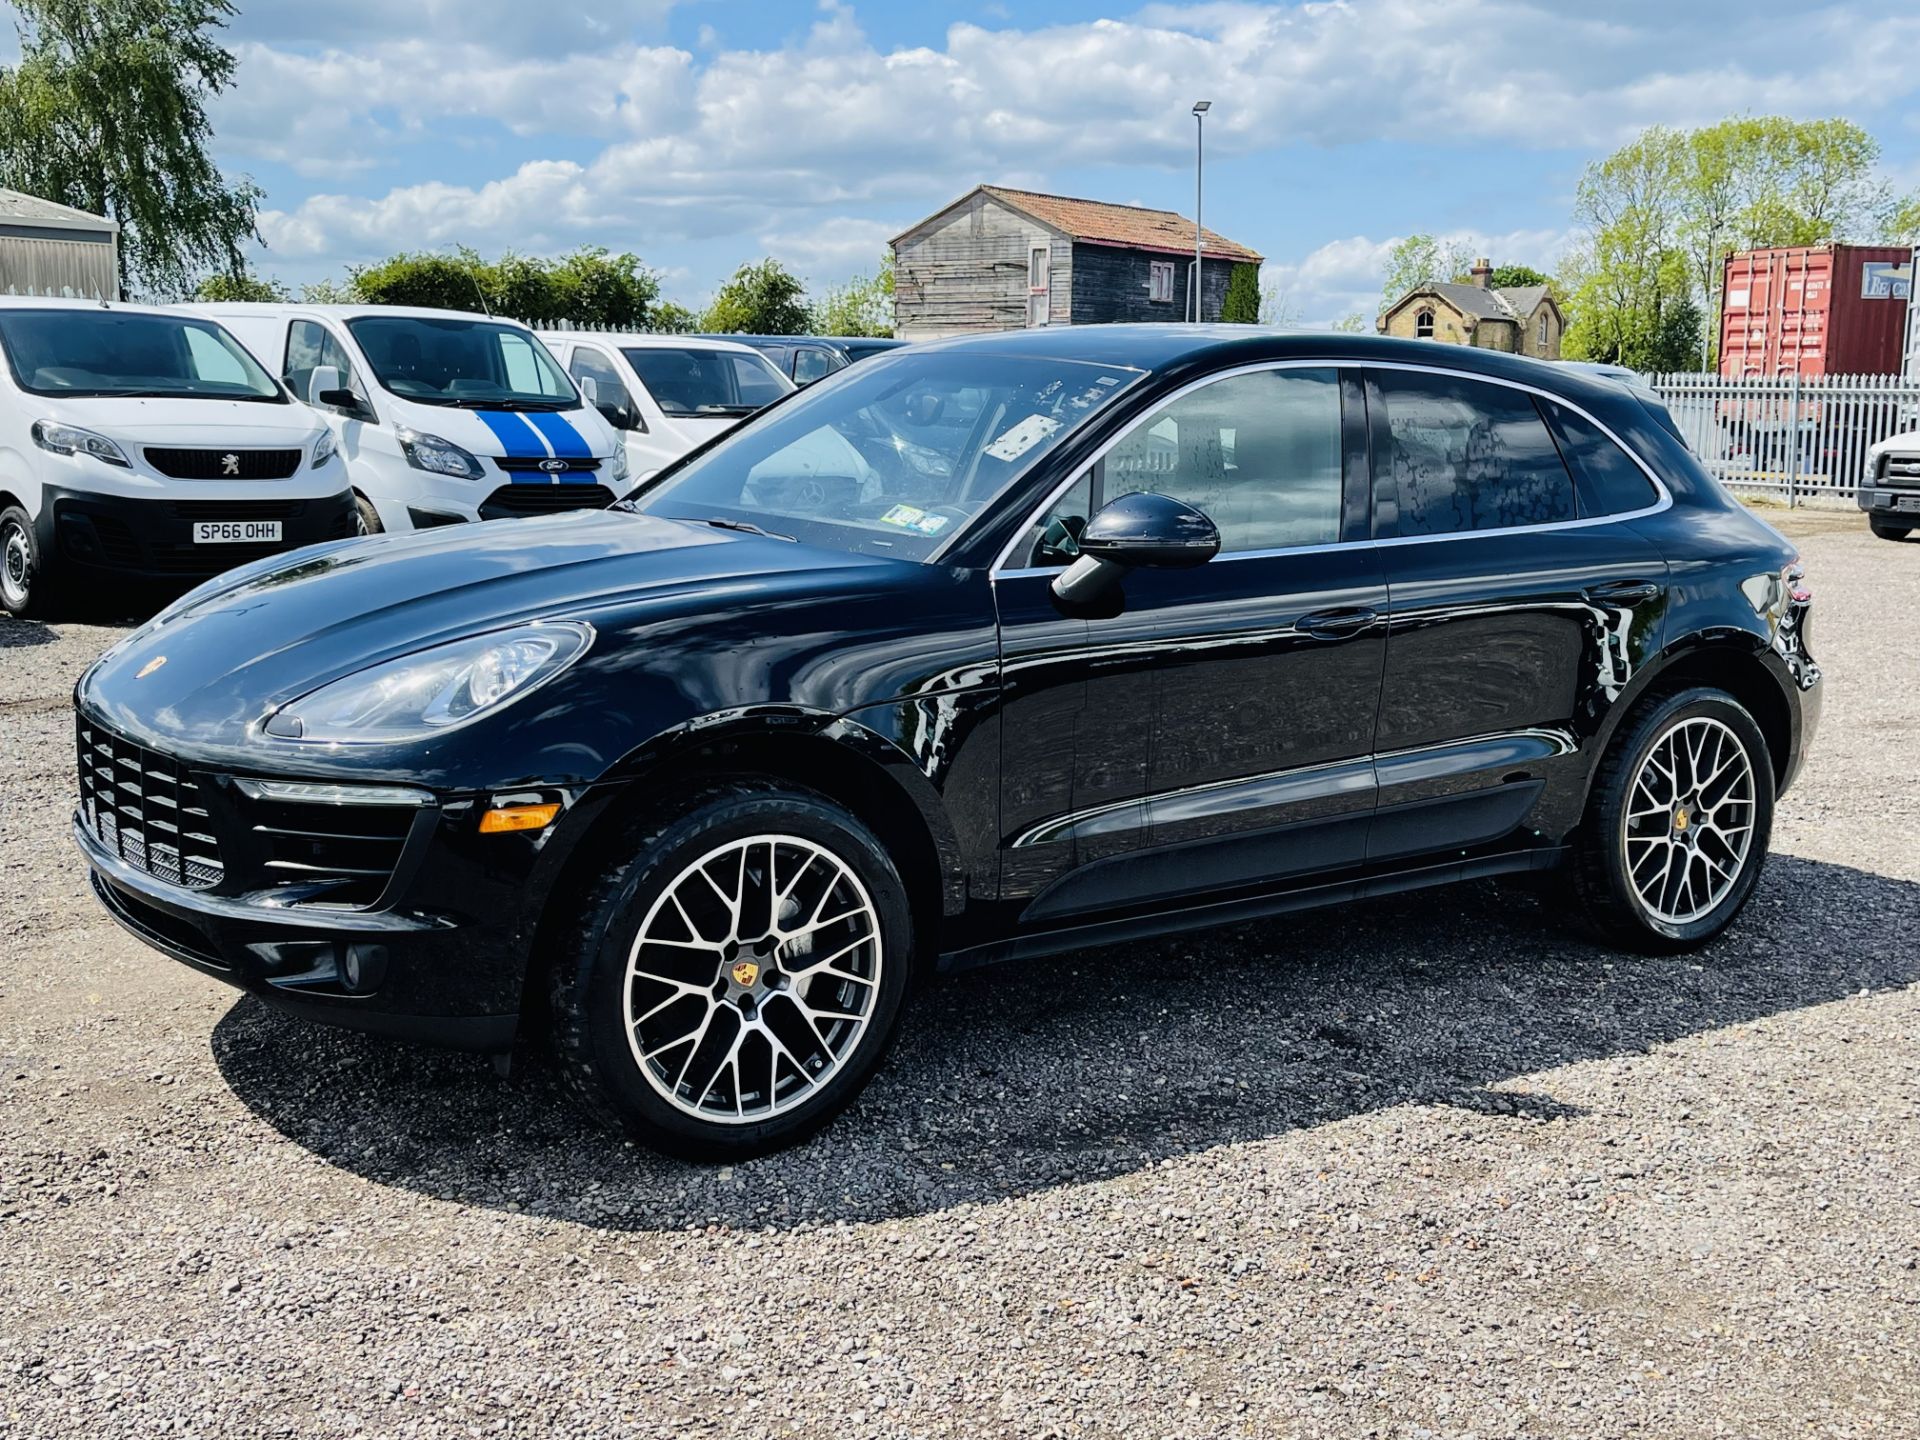 ** ON SALE ** Porsche Macan S 3.0L V6 AWD ' 2015 Year ' Sat Nav - Panoramic Roof - ULEZ Compliant - Image 6 of 44